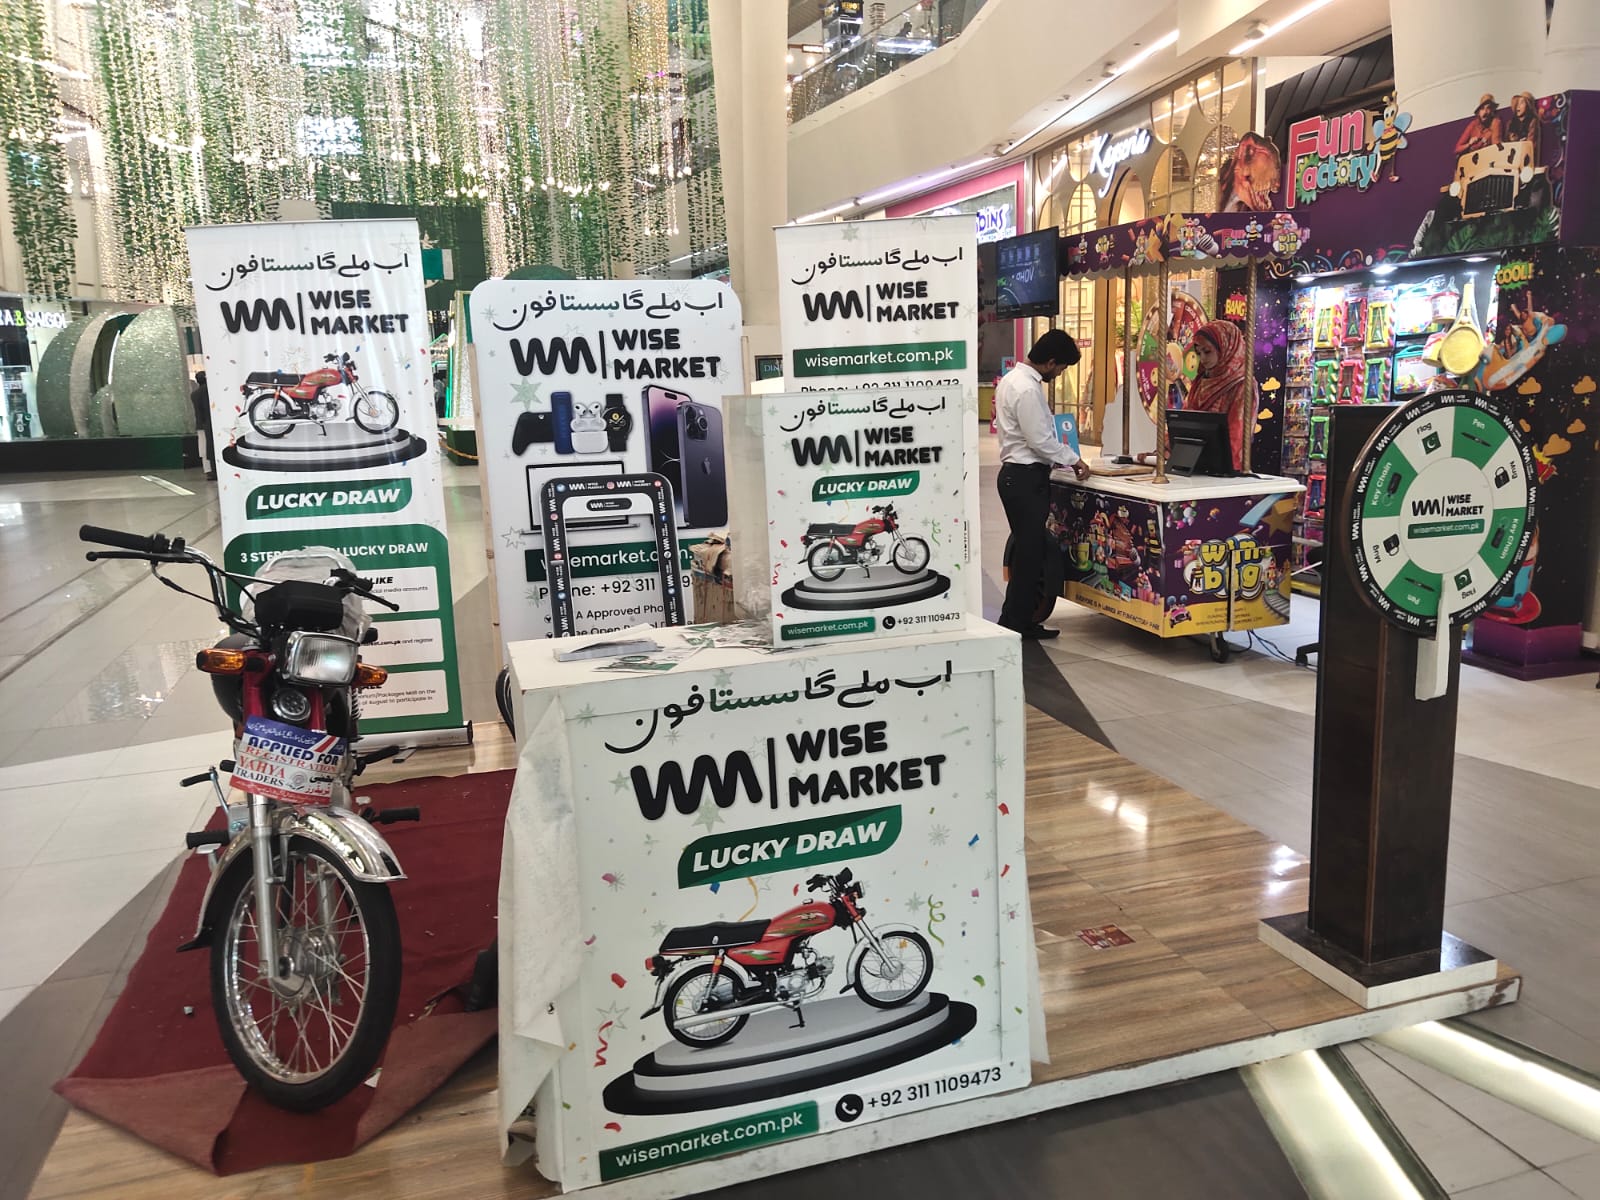 2nd Day, 2nd Chance Wise Market's Lucky Draw & Giveaway at Emporium